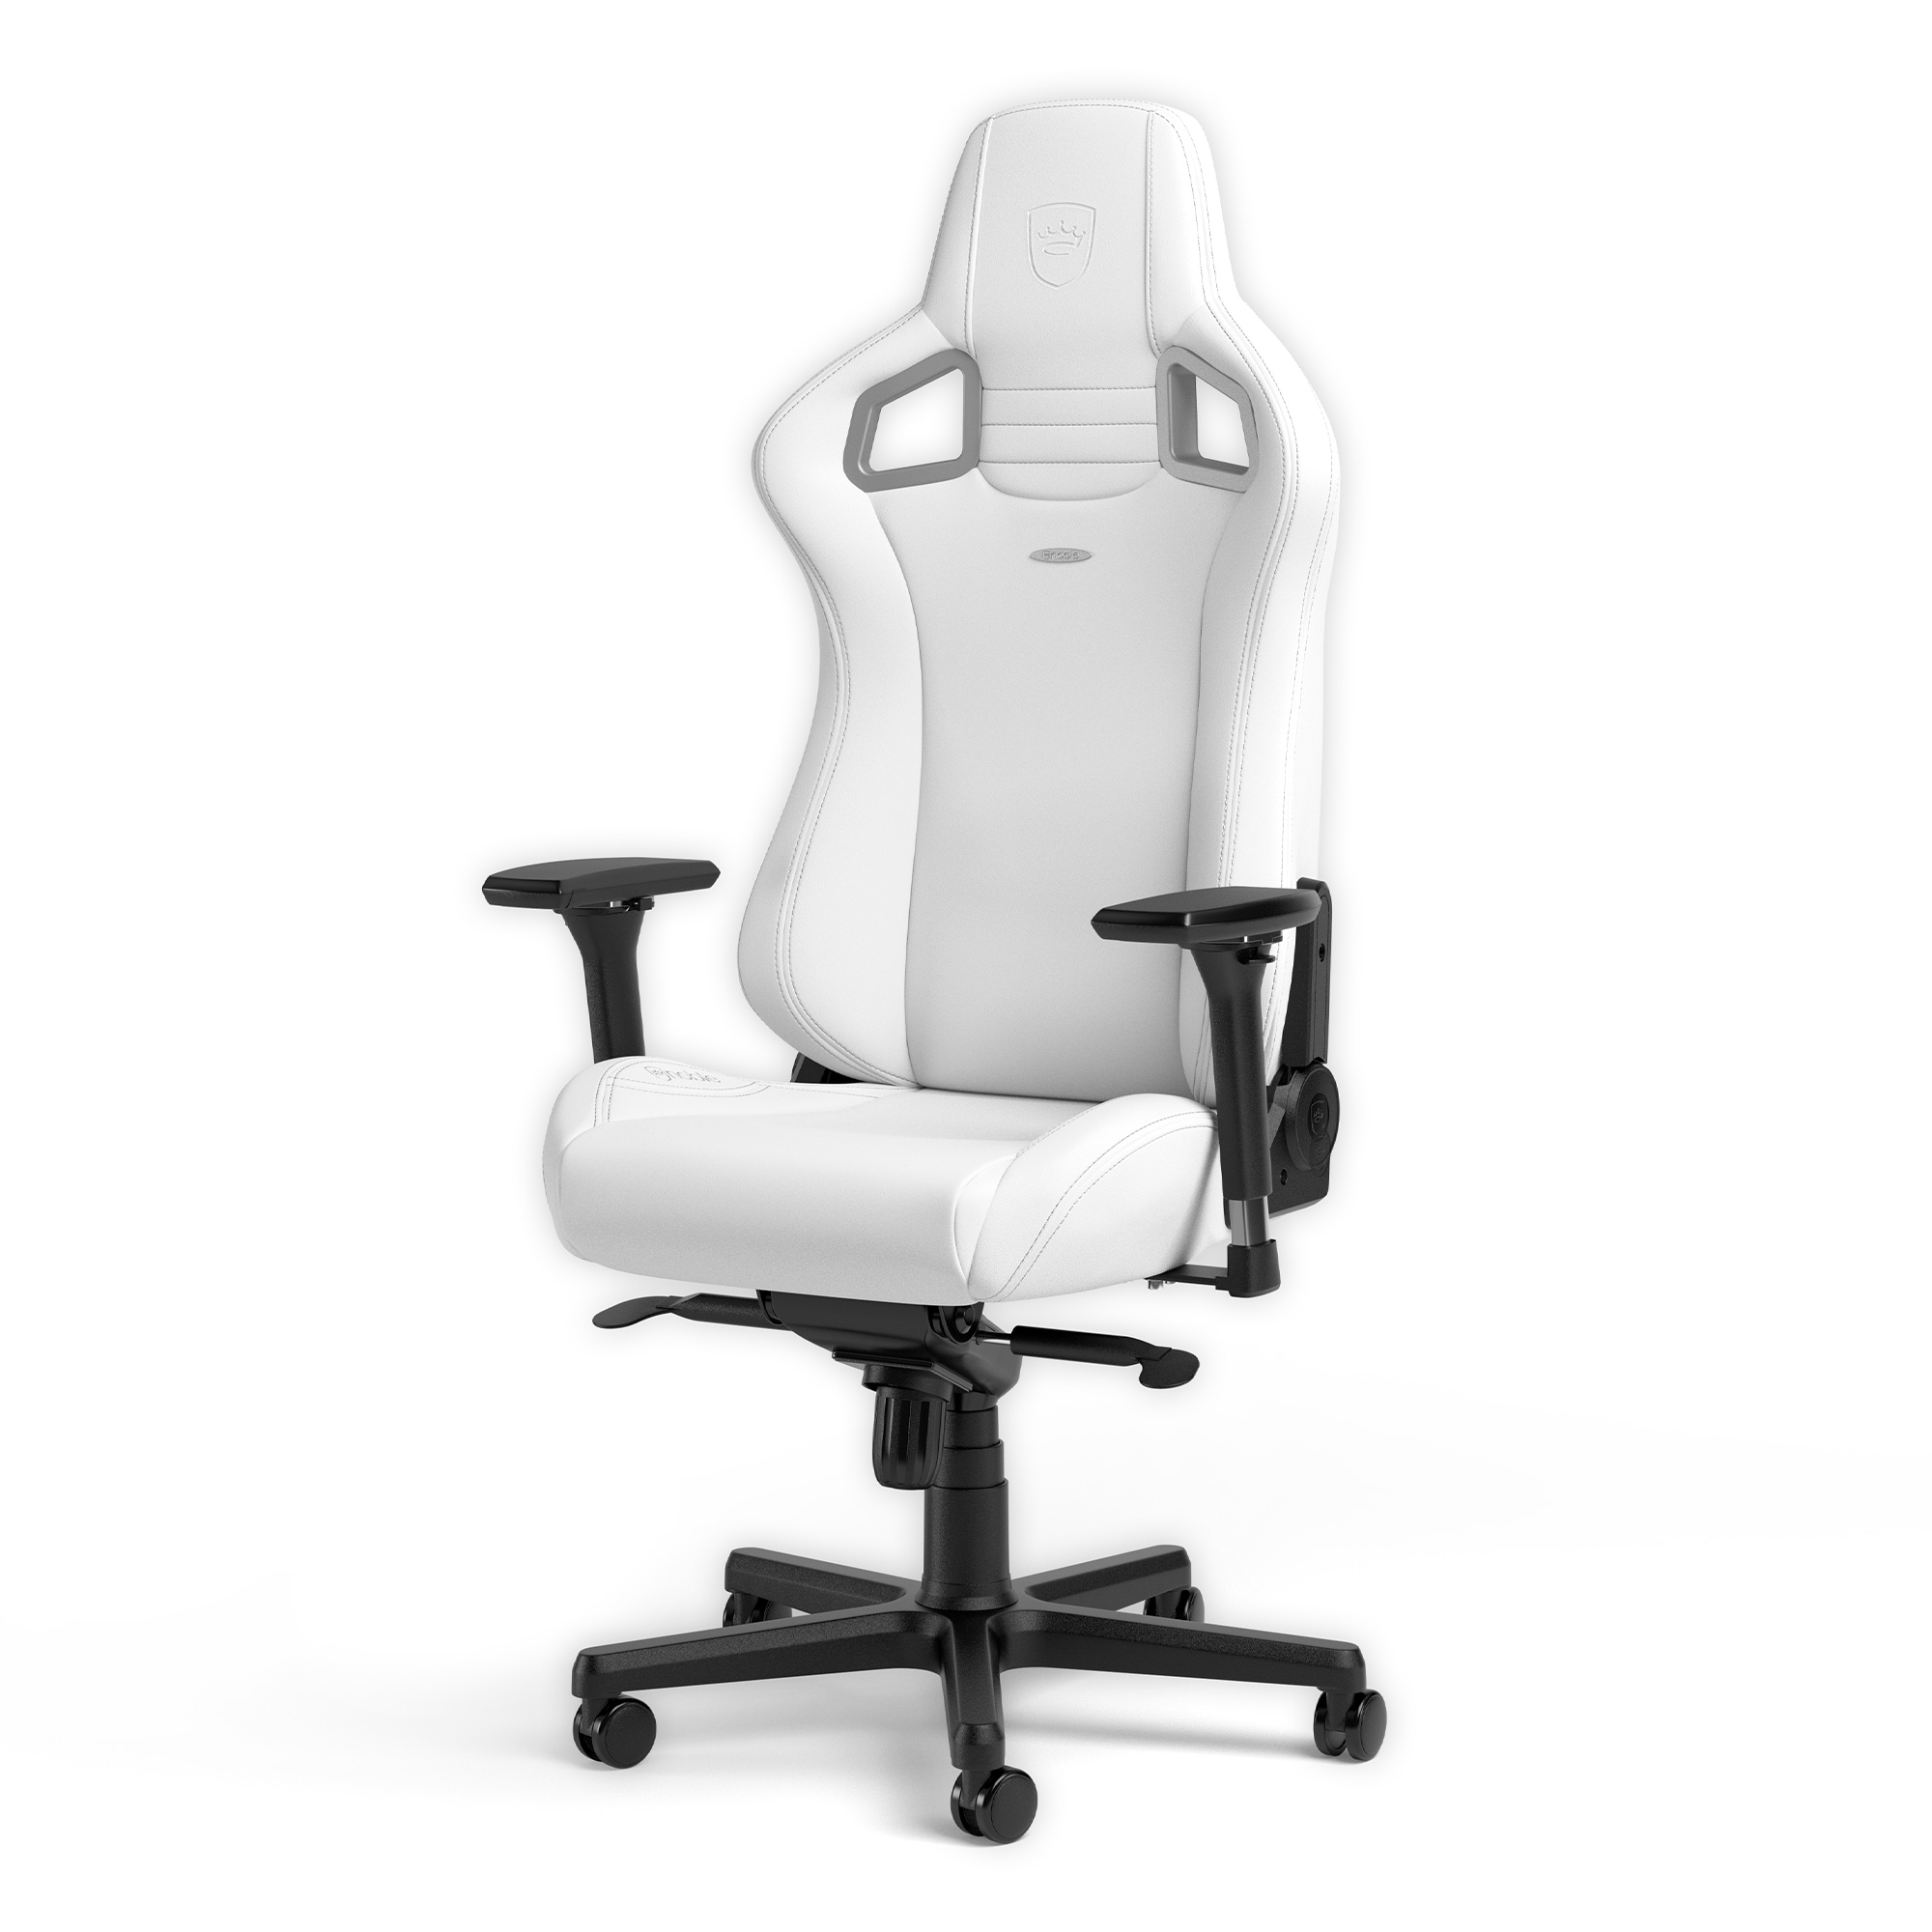 B Grade noblechairs EPIC Gaming Chair - White Edition